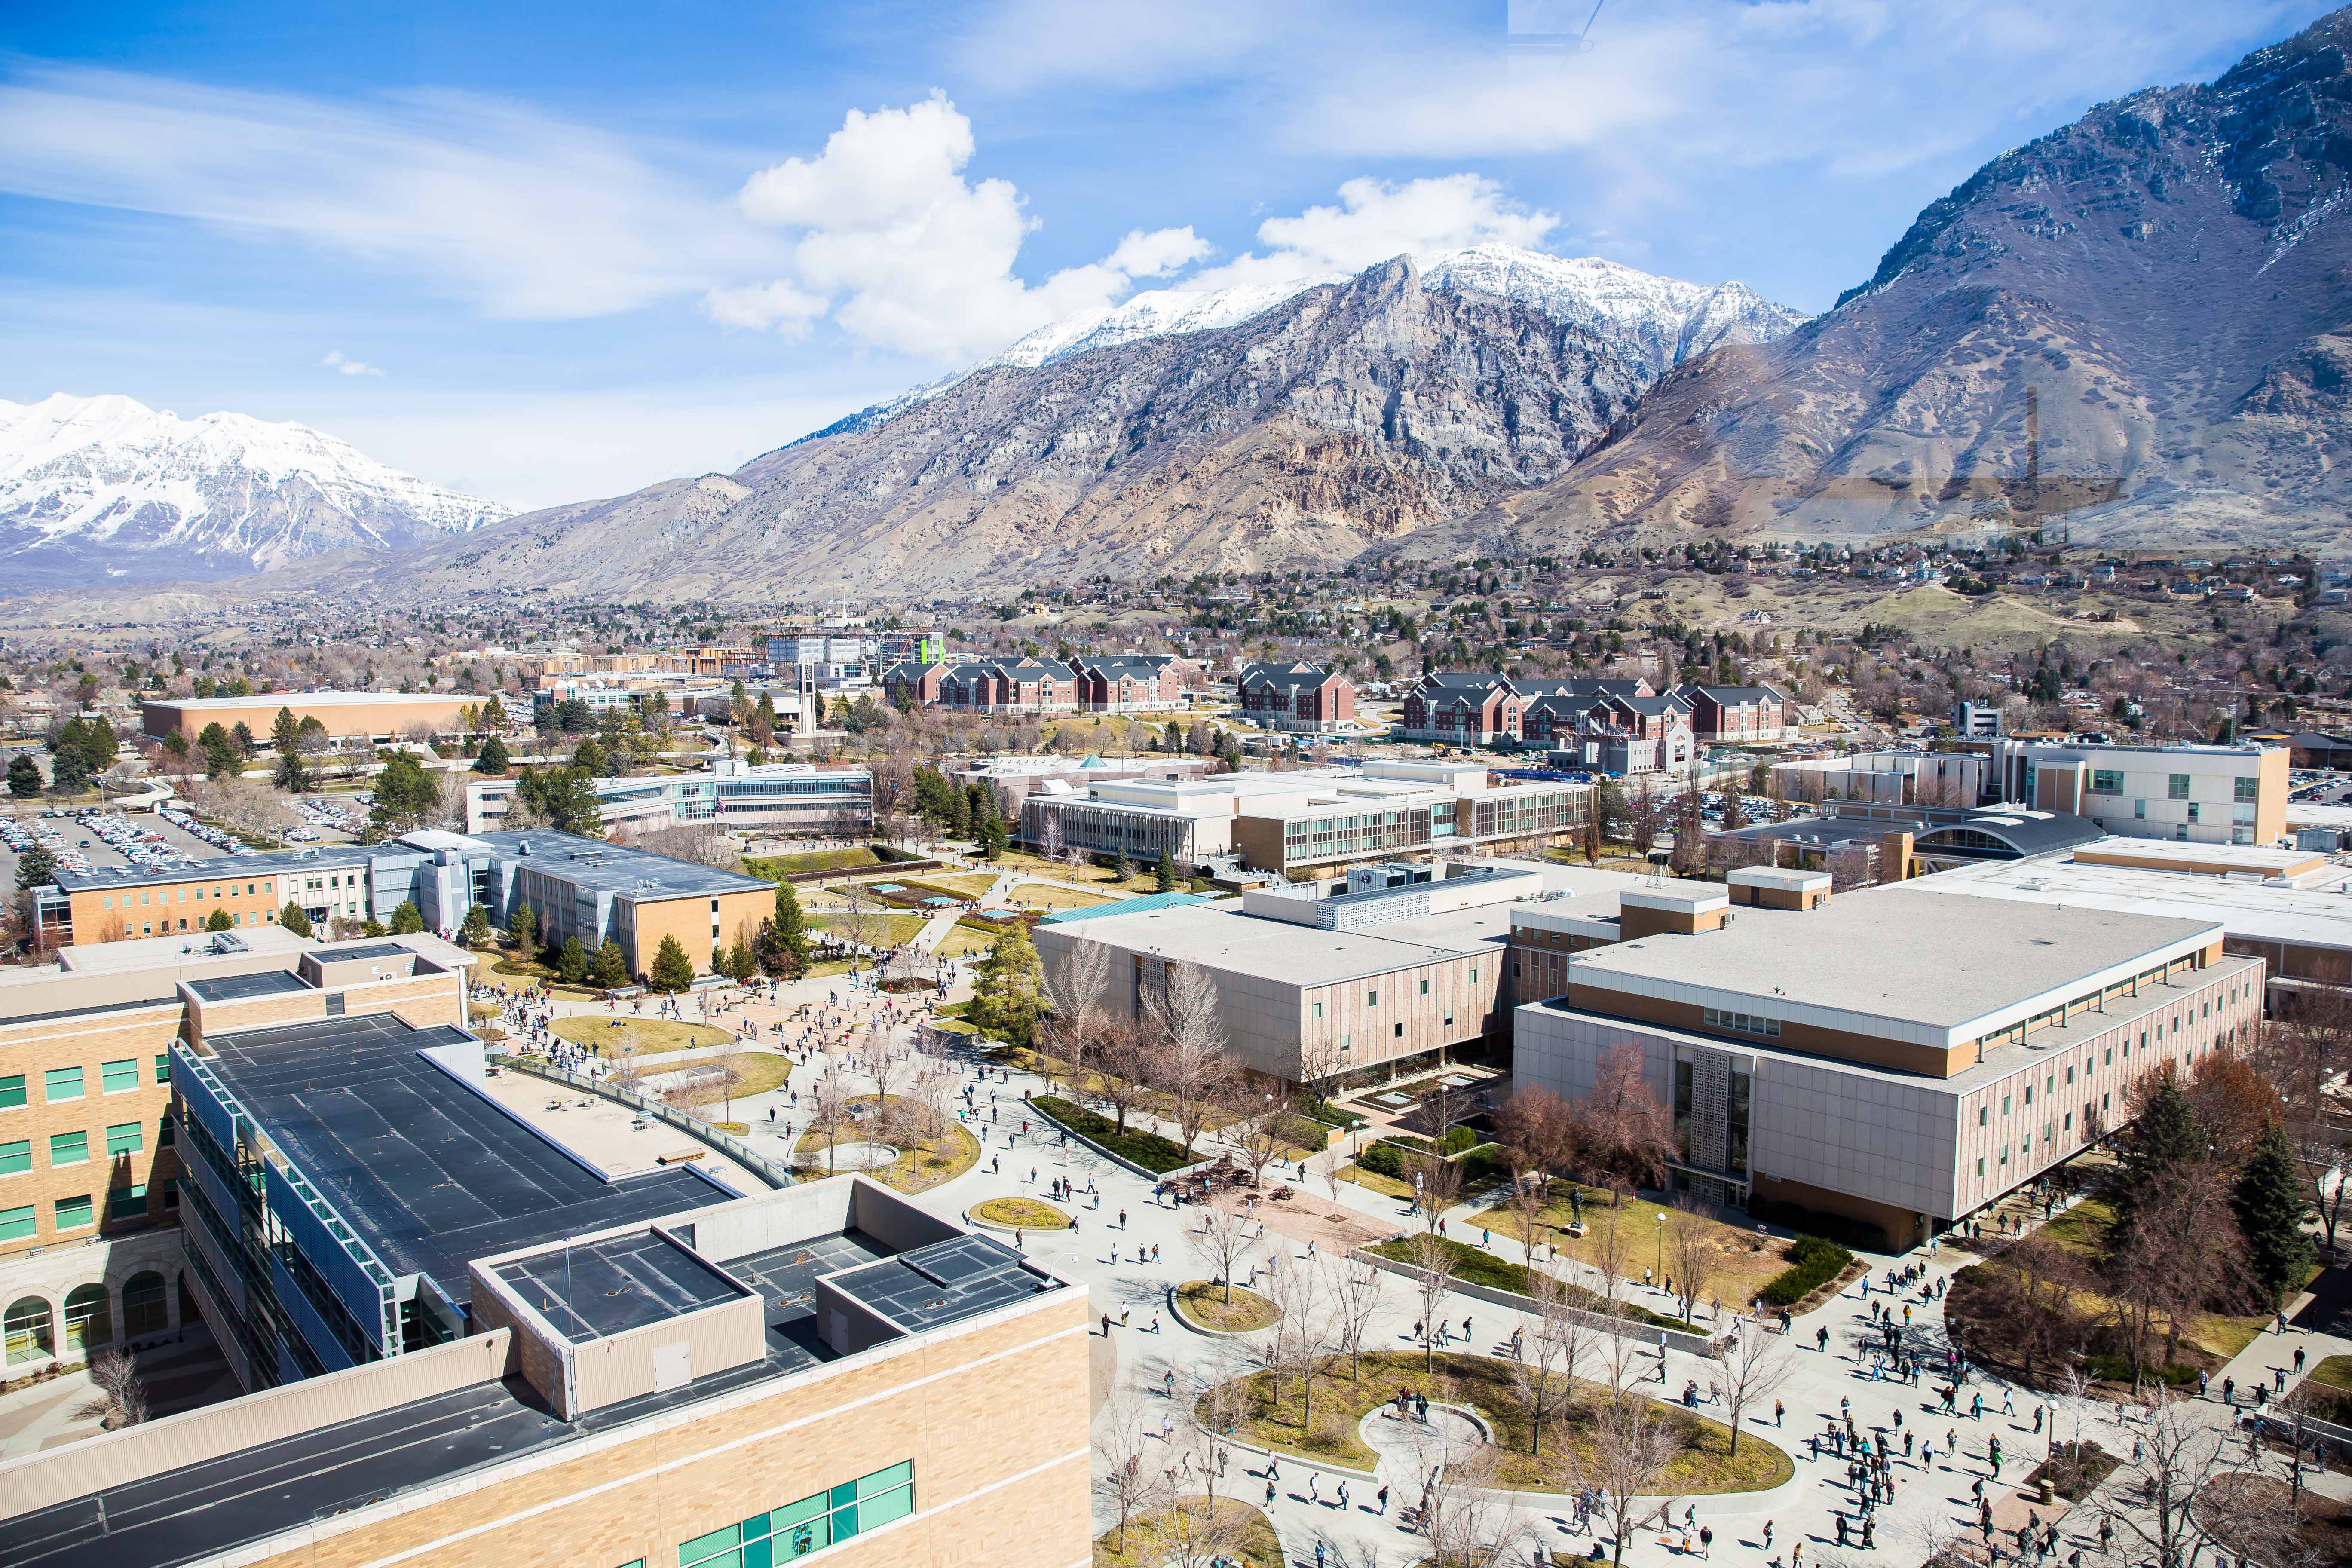 Byu Formalizes Updated Sexual Assault Policy The Daily Universe 